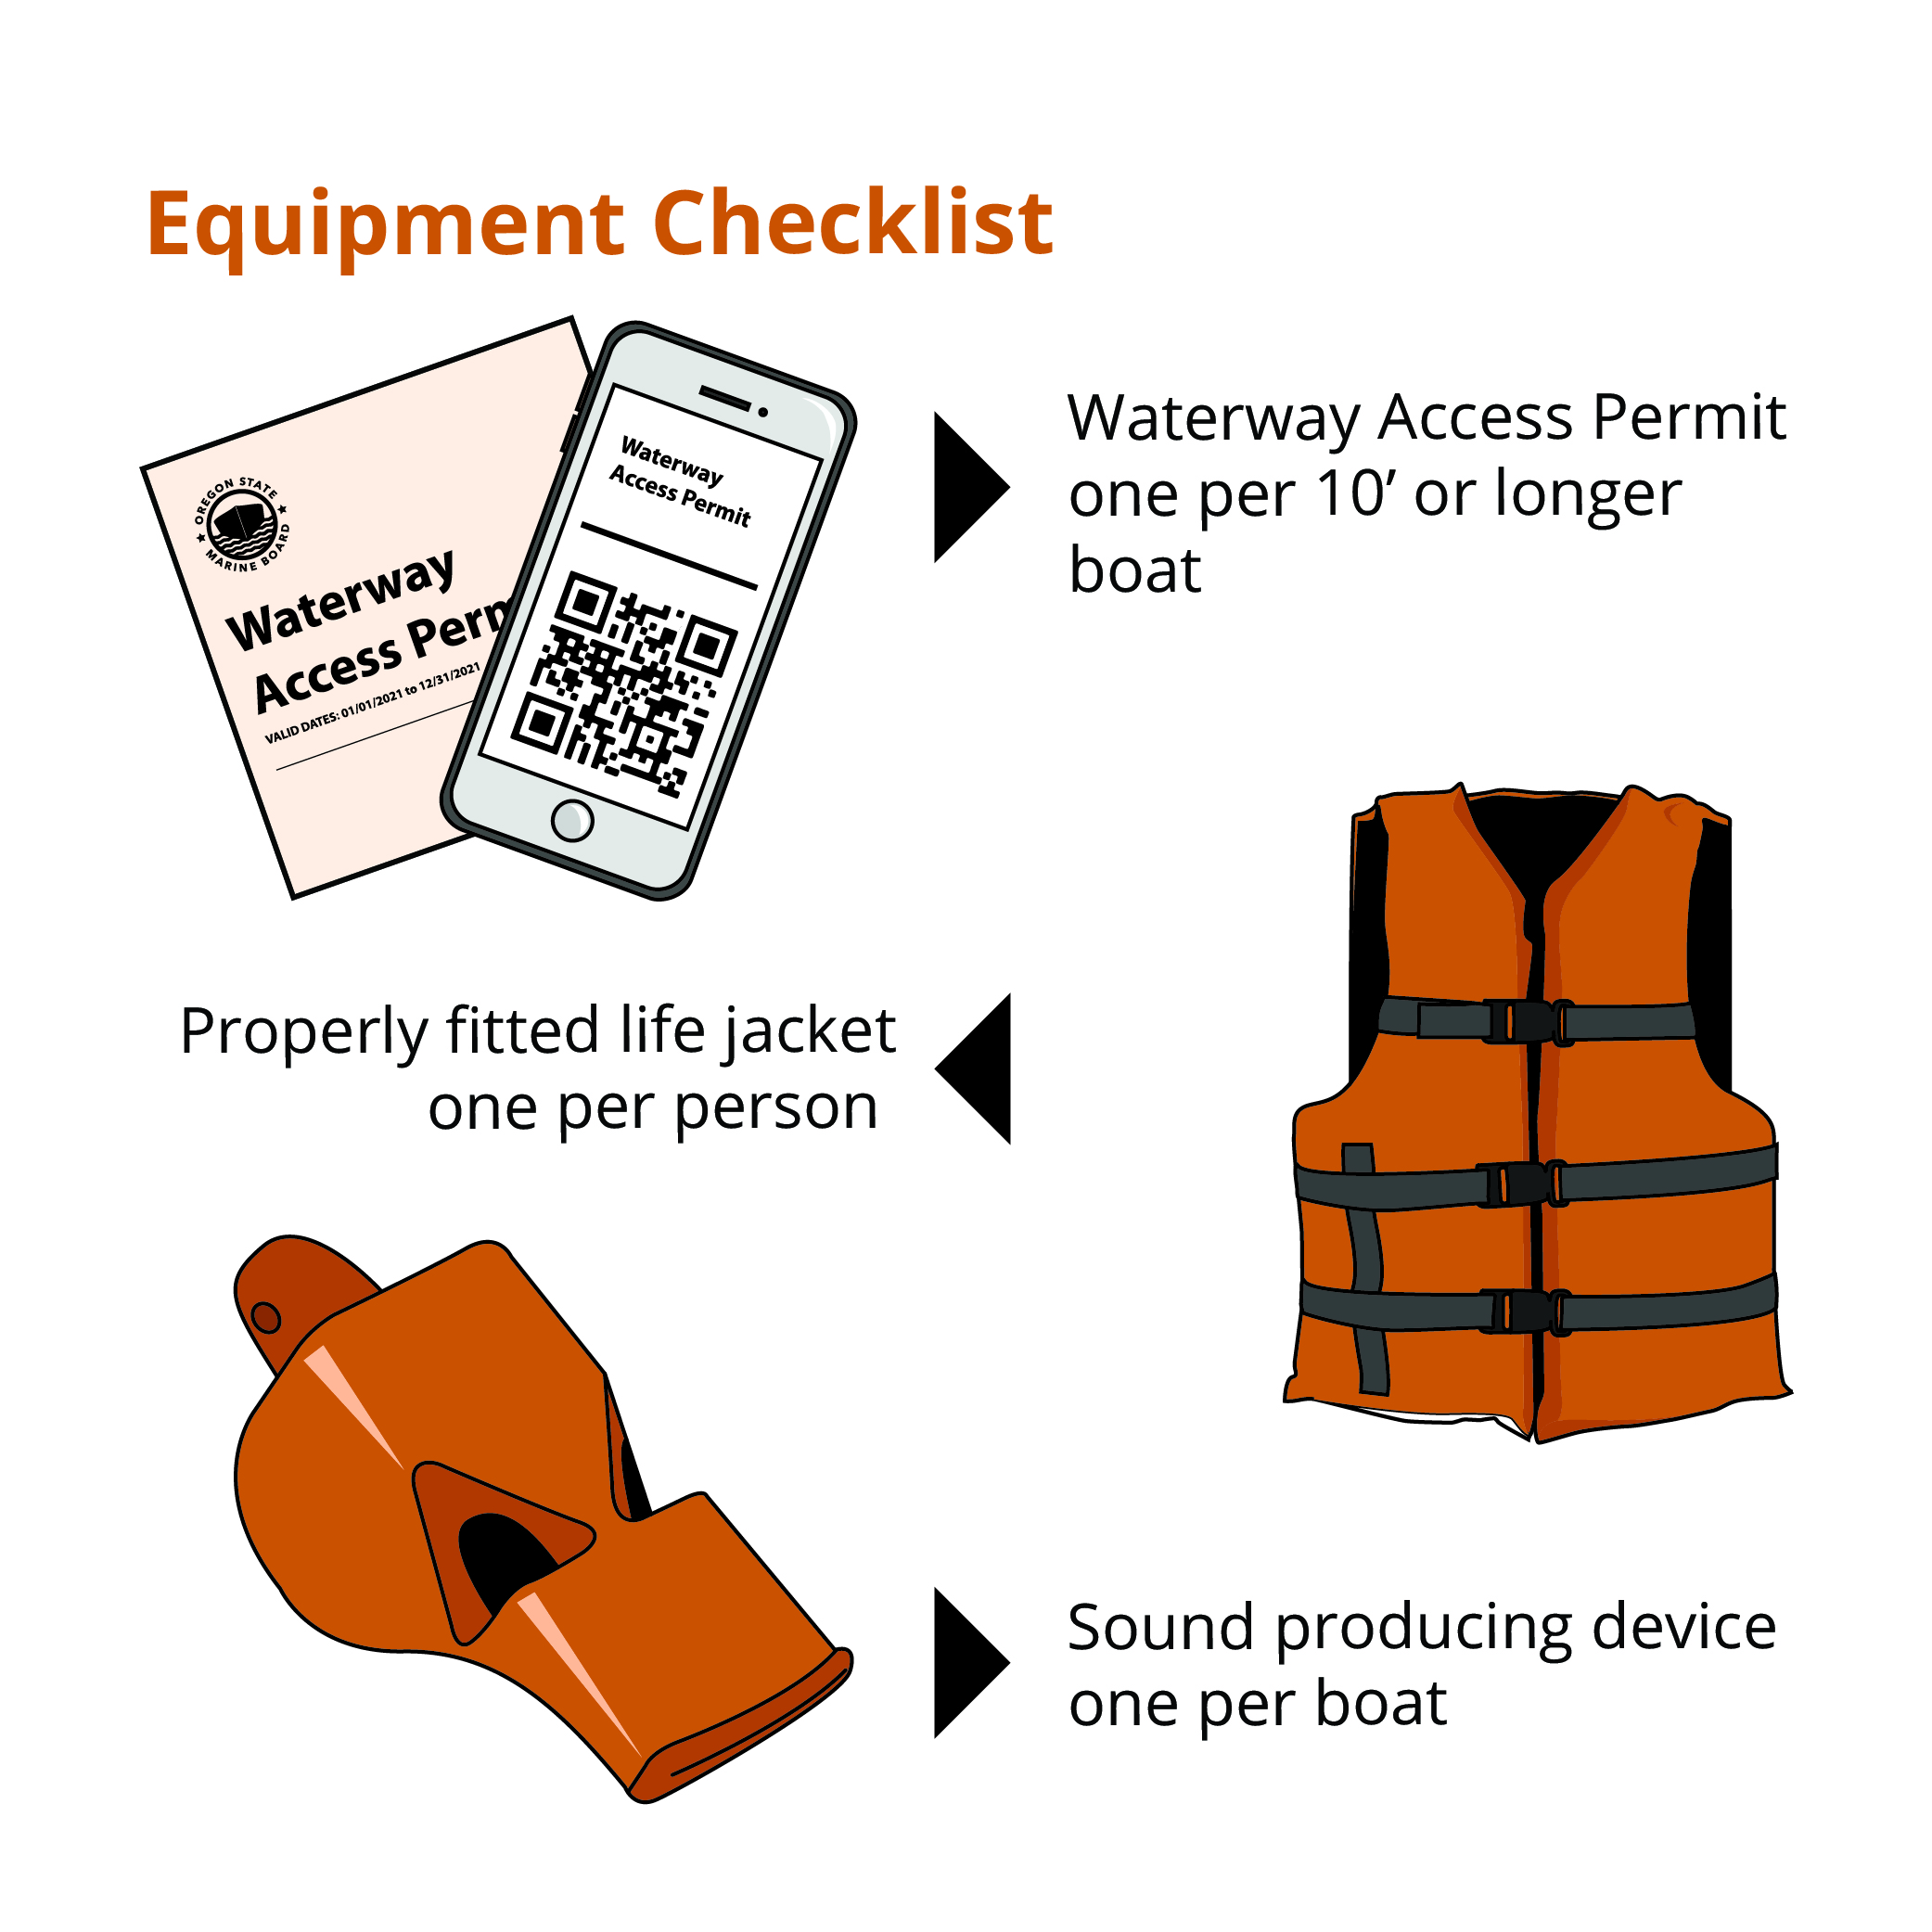 Ramp signage of required equipment and waterway access permit for paddlers